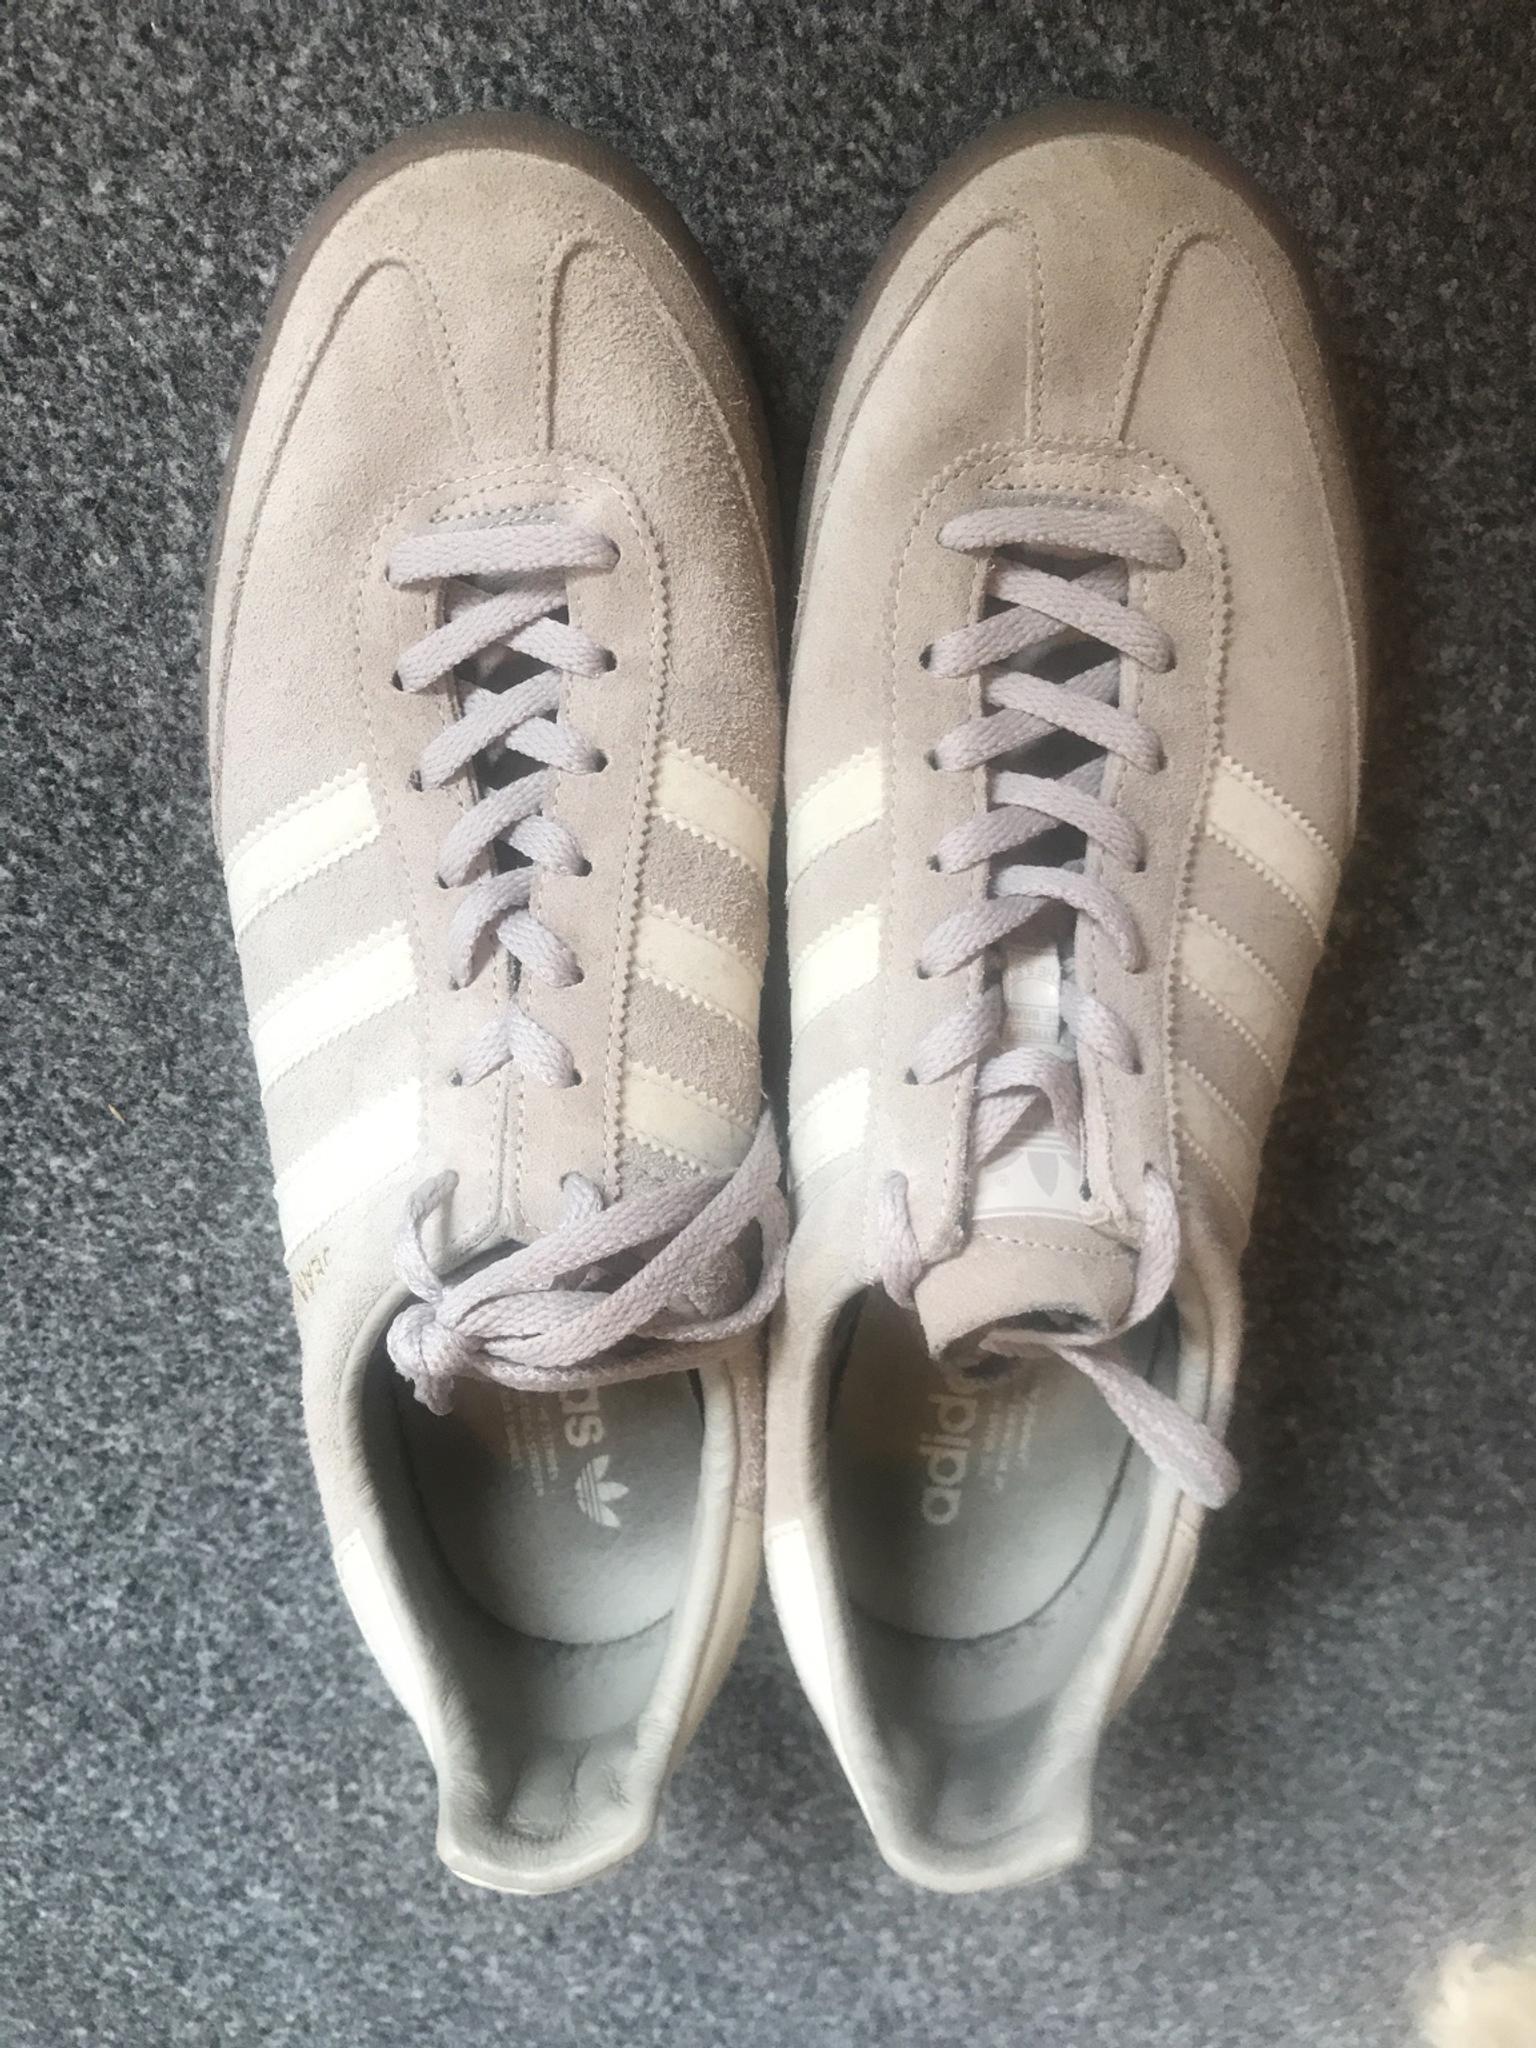 adidas jeans trainers uk